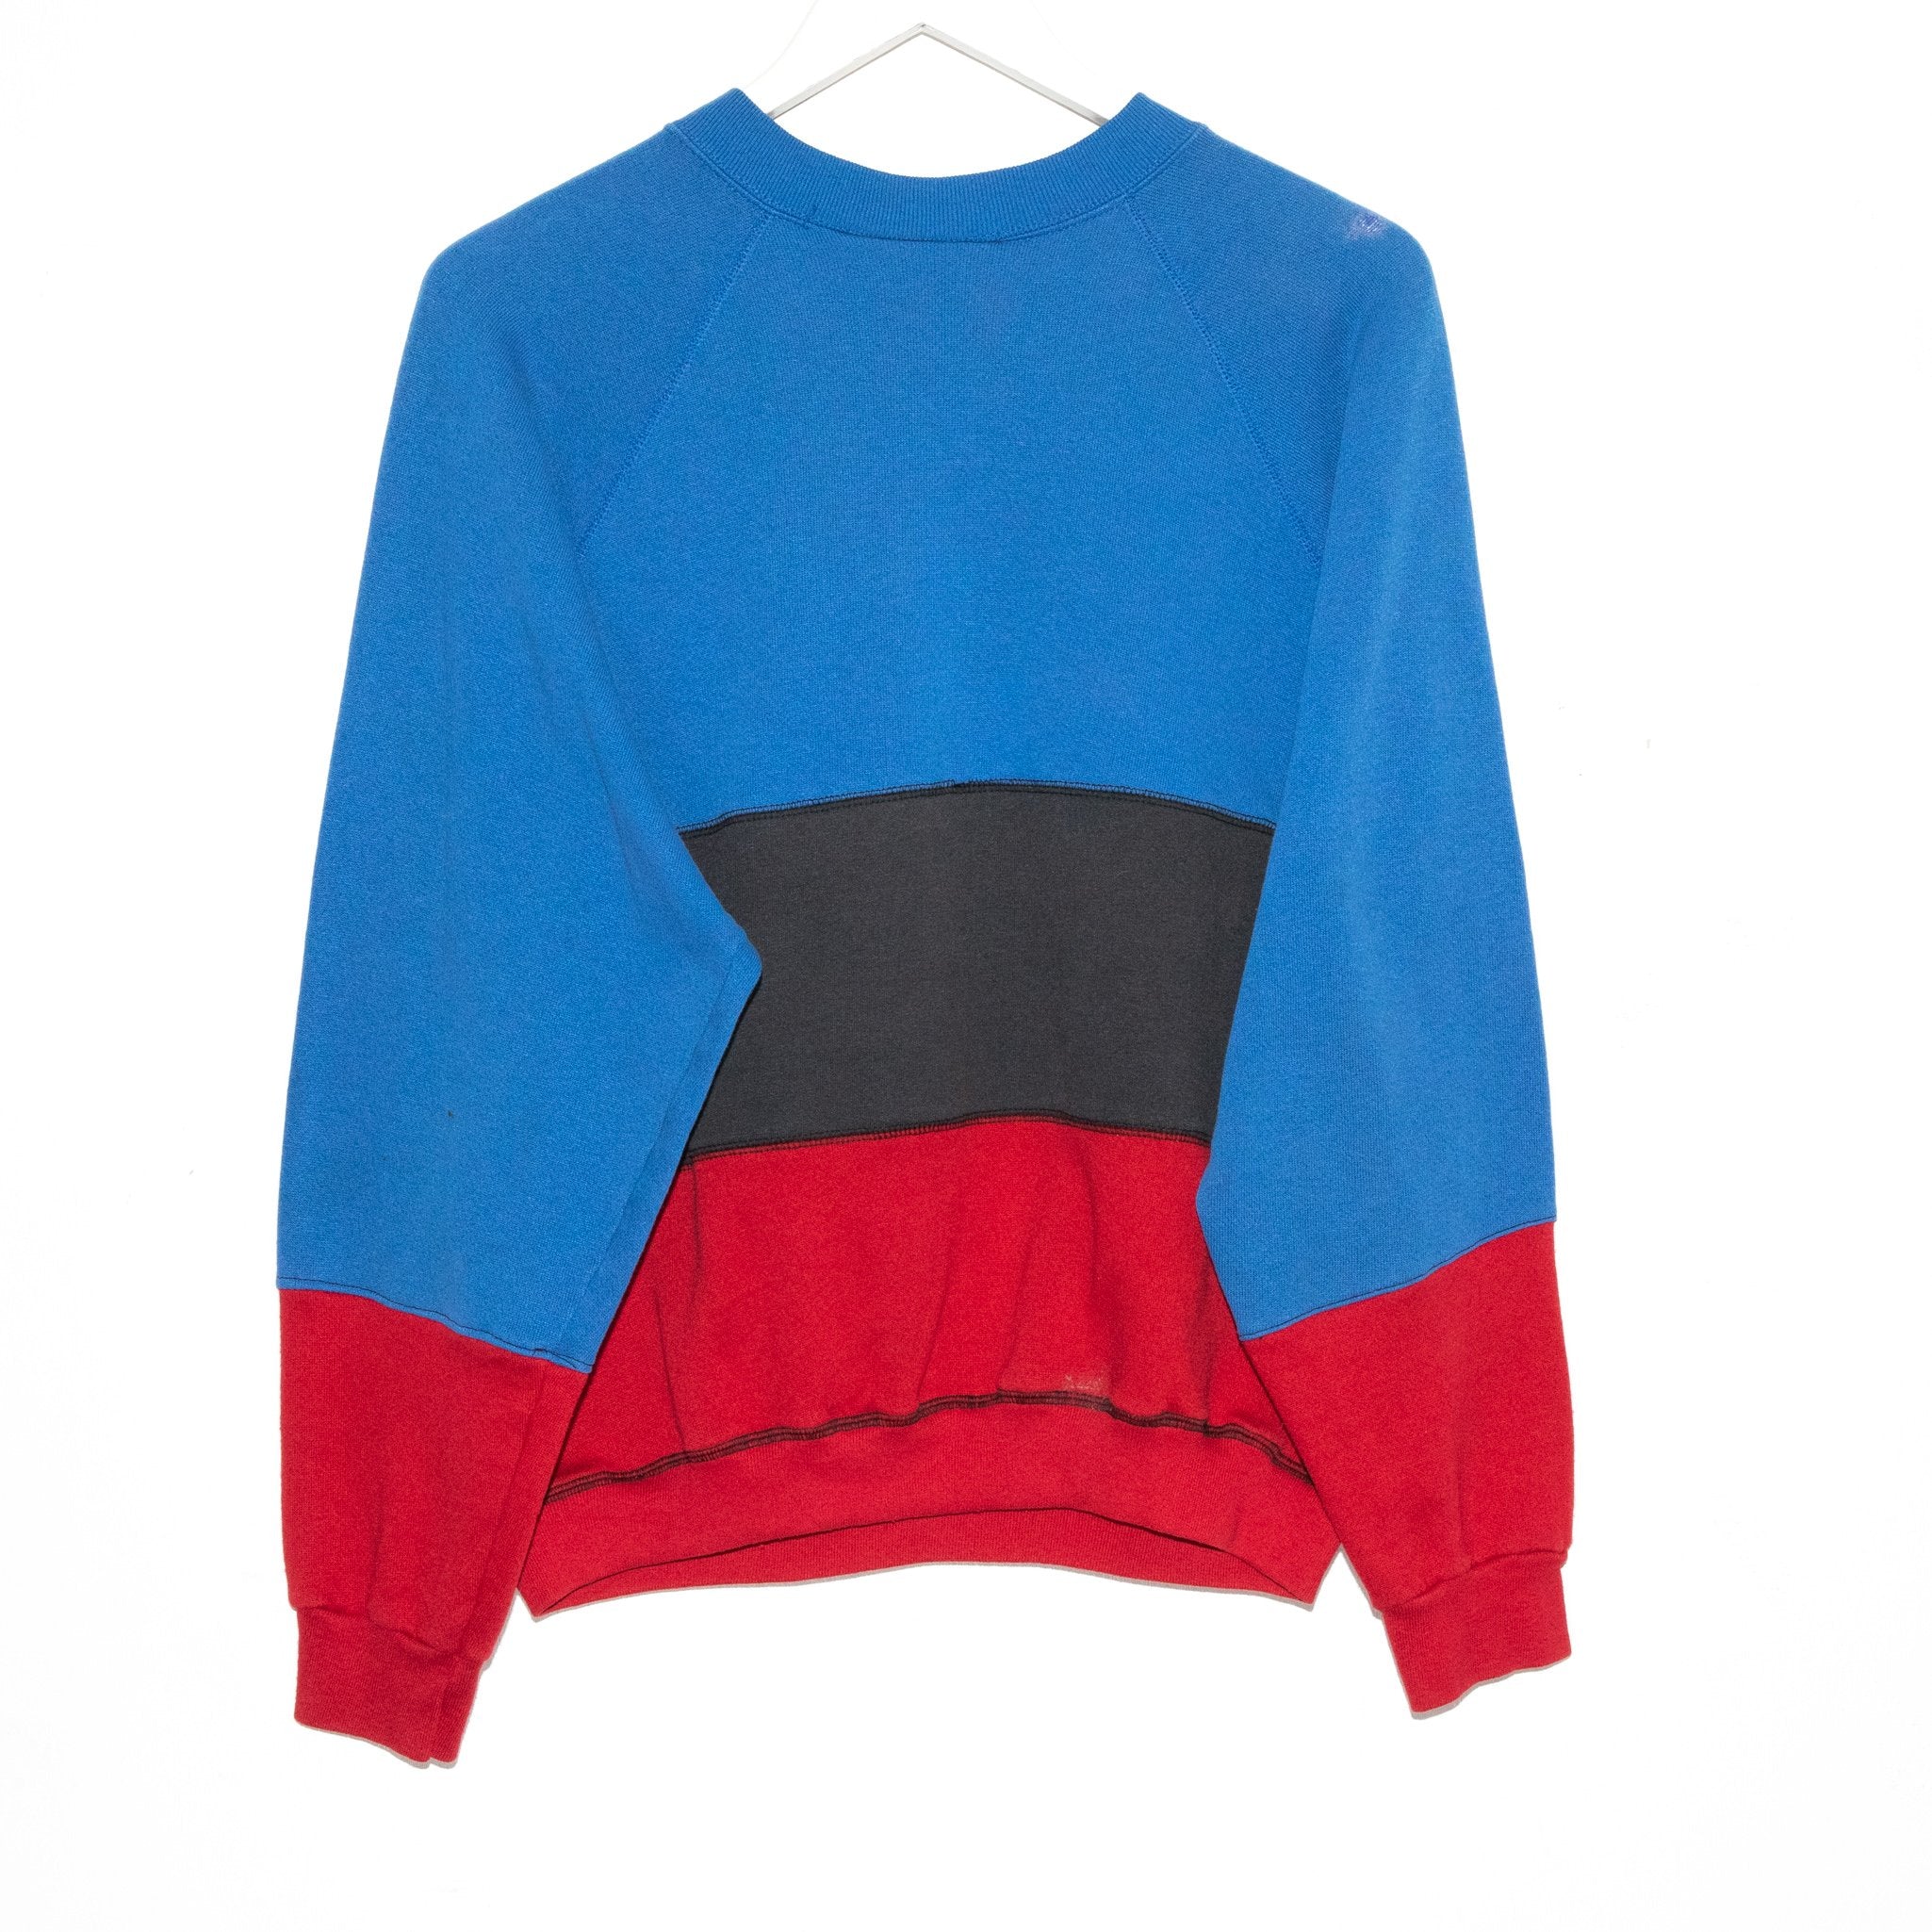 Storeroom Upcycled Colorblock Jumper (L)